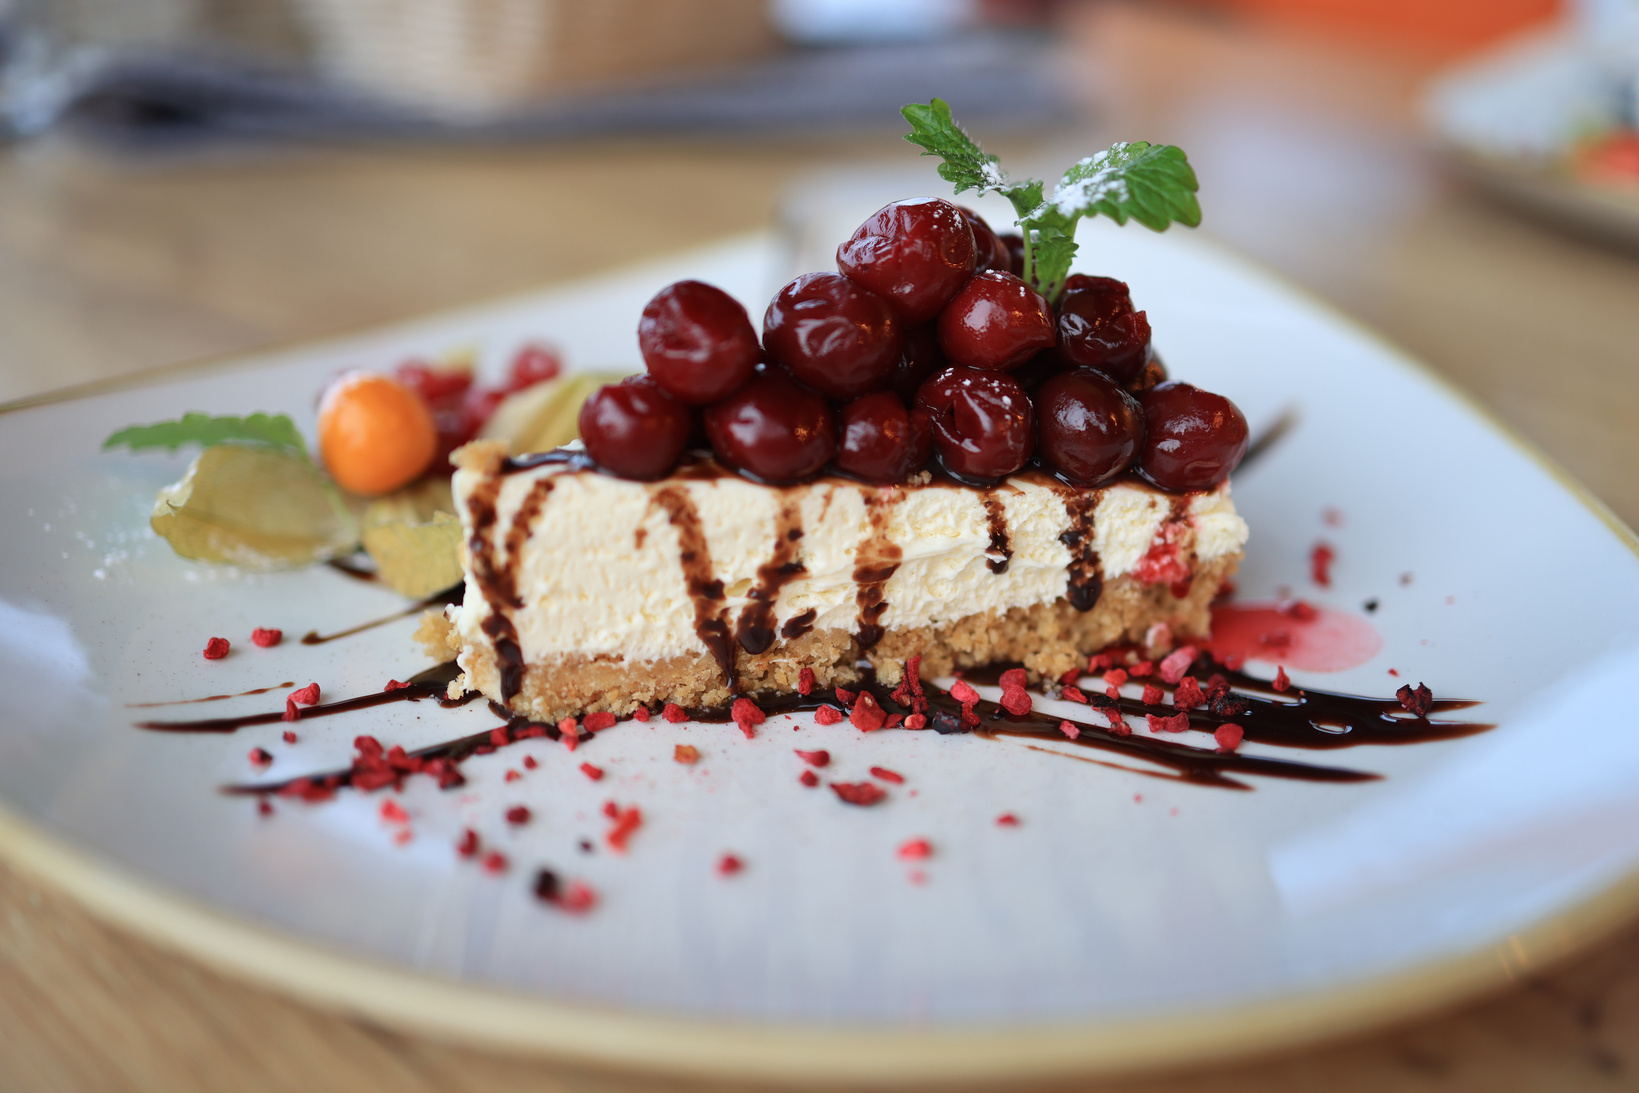 A Cheesecake with Cherries on Top